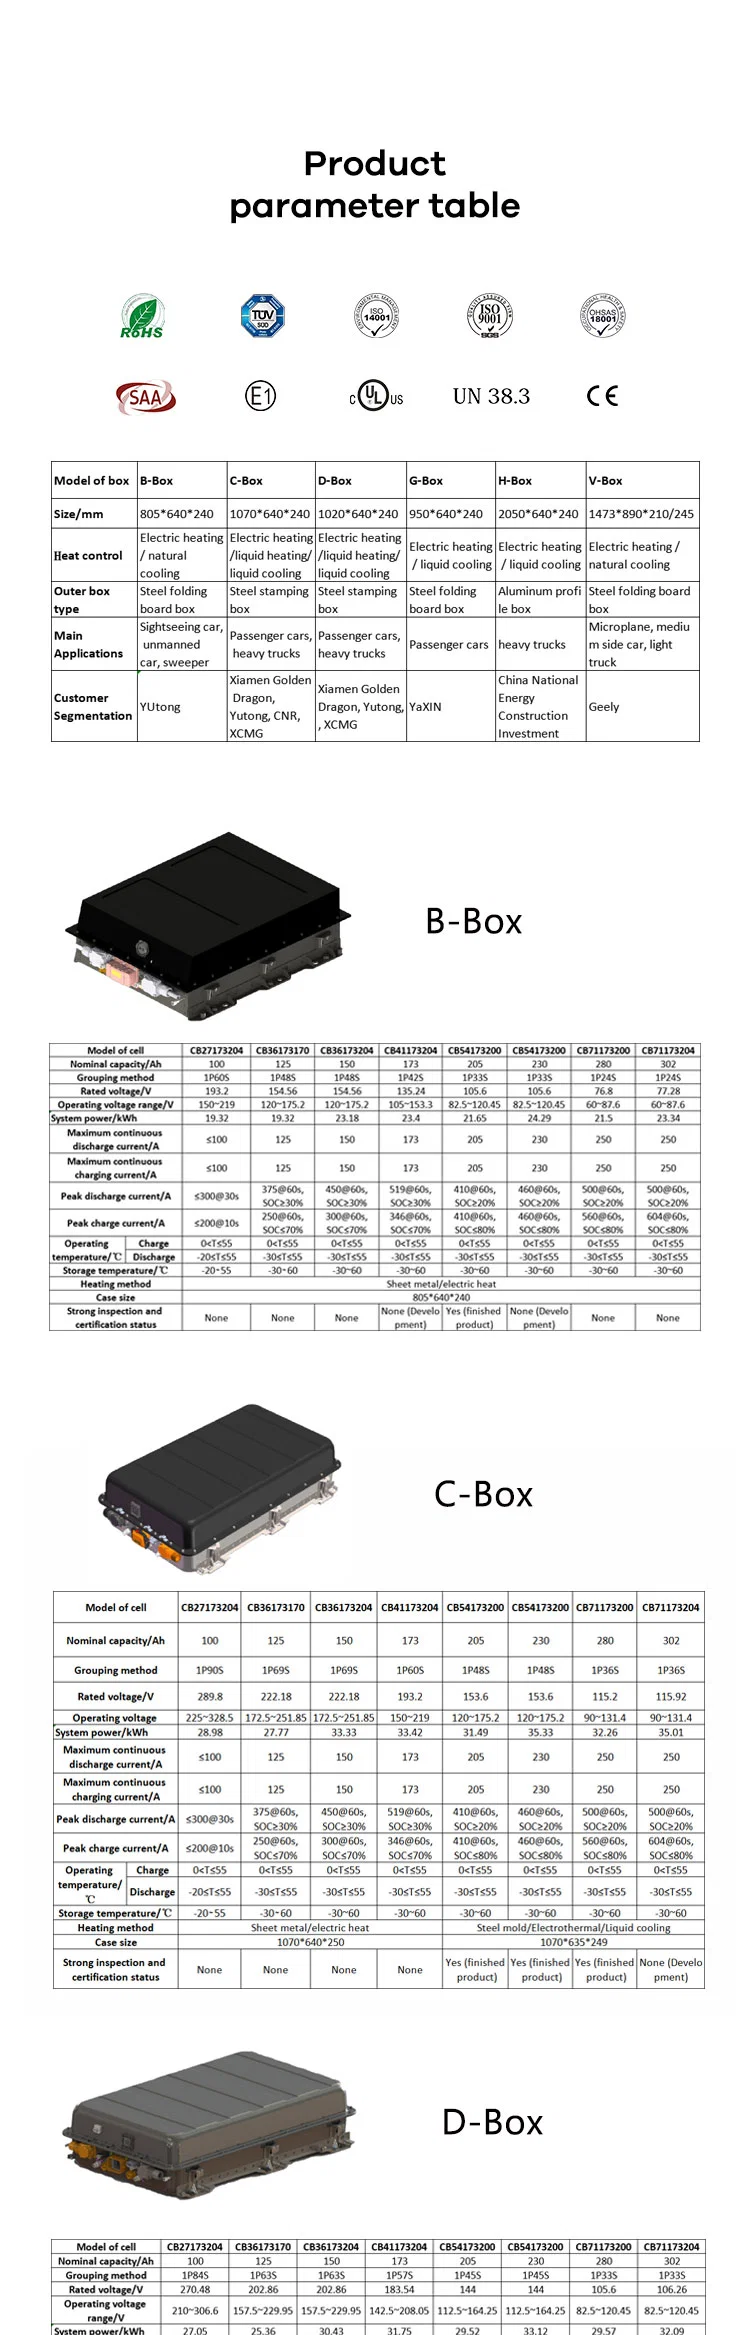 202.86V 125ah (125Ah 1P63S) LiFePO4 (LFP) Lithium Battery Pack Storage D Box Battery for Electric Vehicle Power Supply